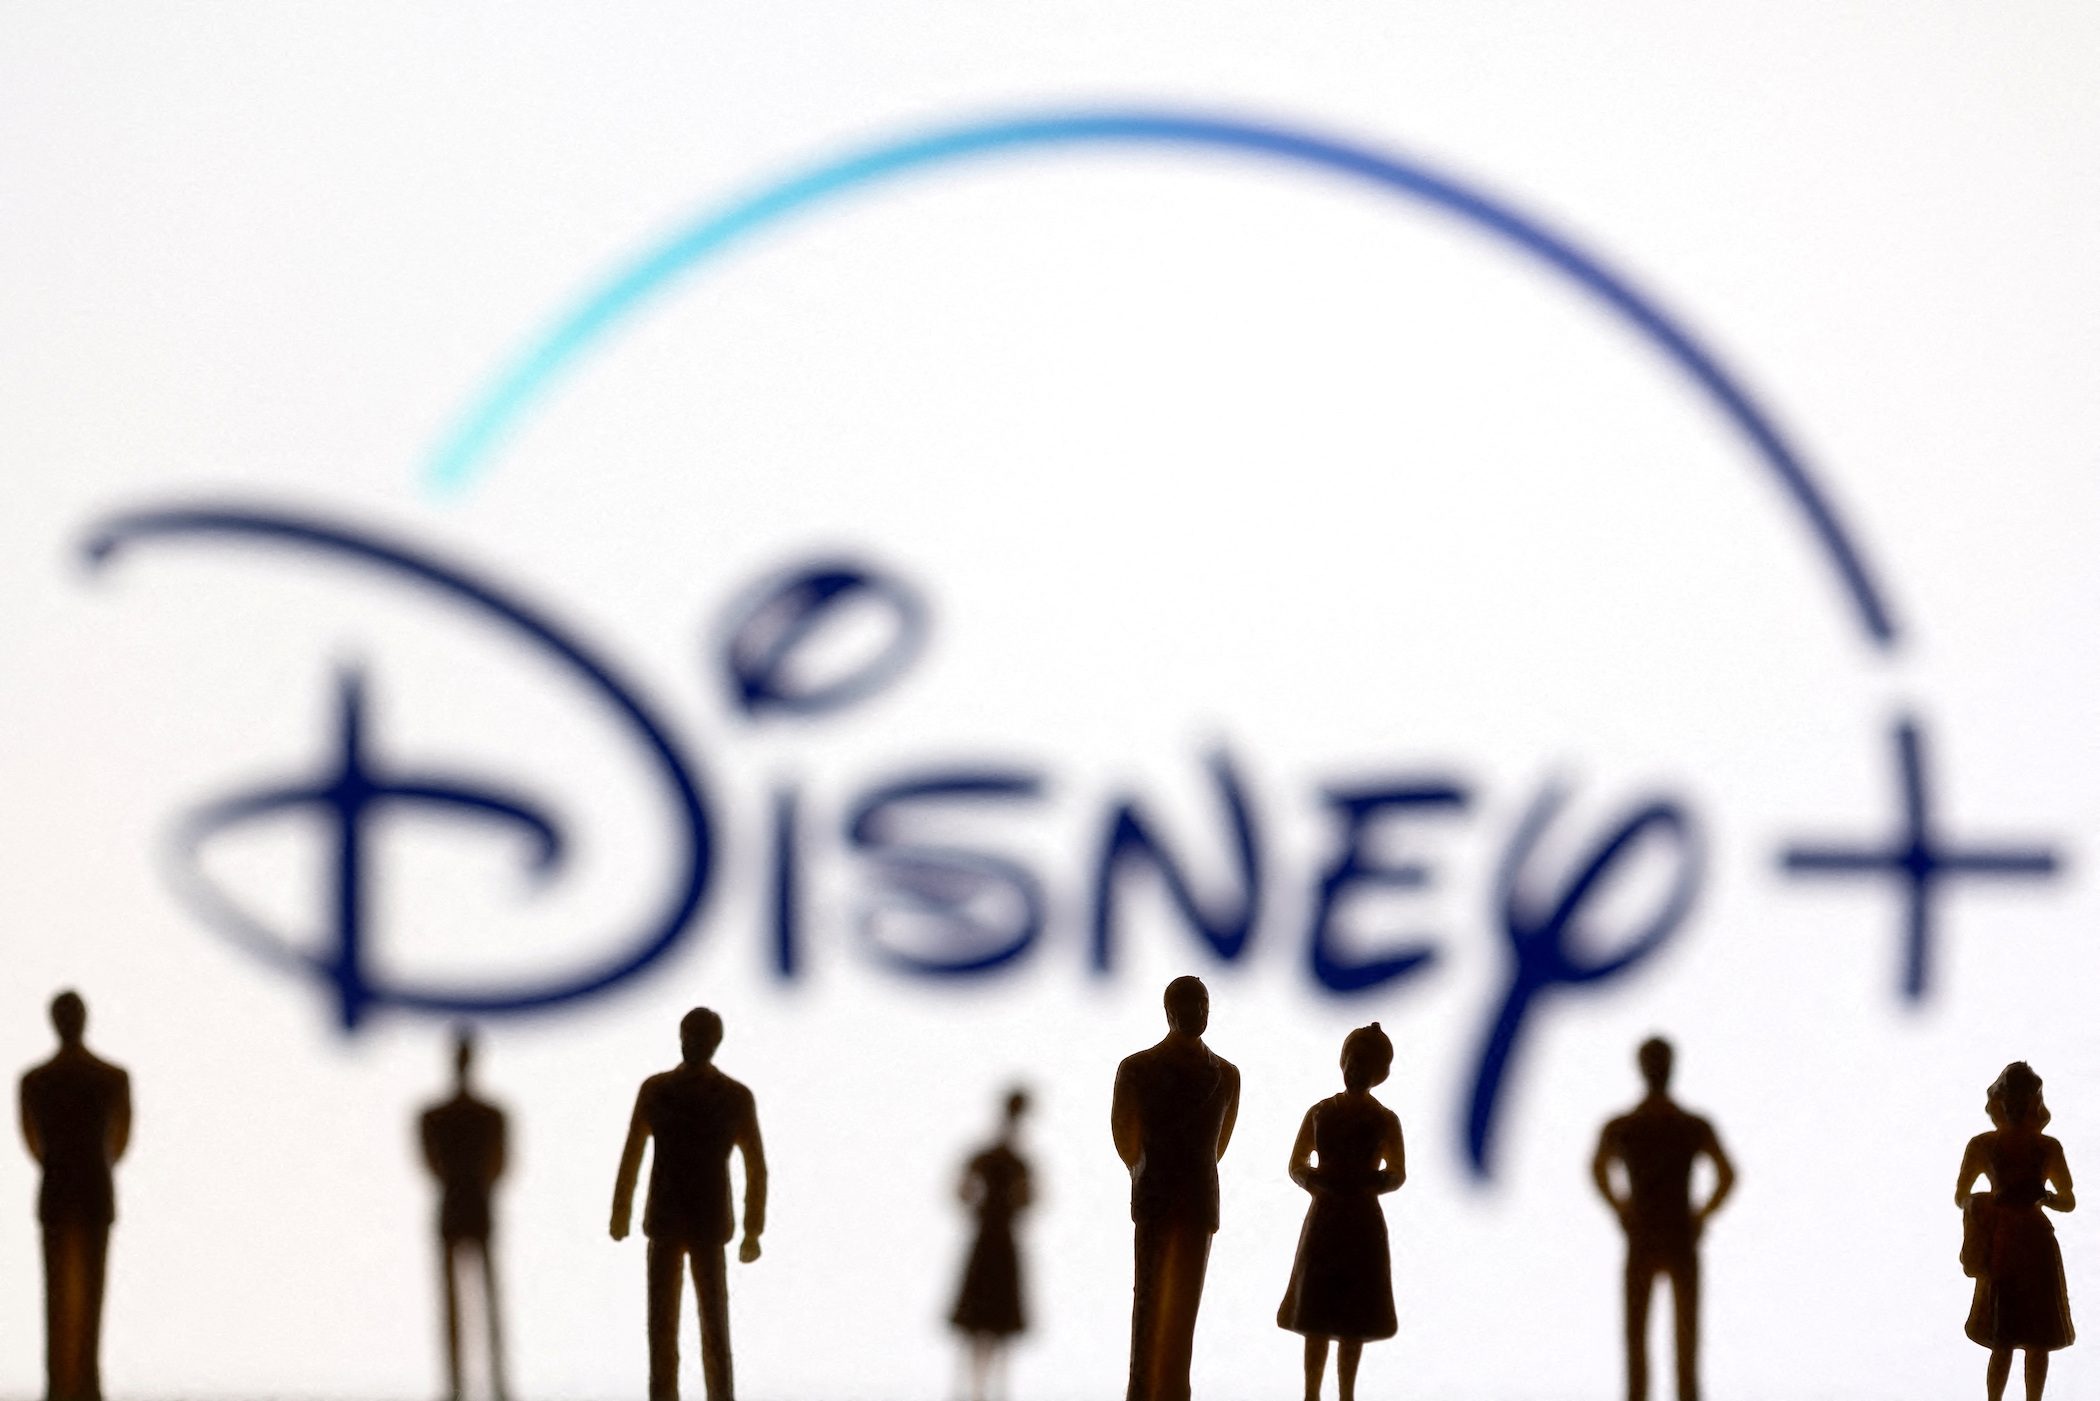 Disney to cut 7,000 jobs in major revamp by CEO Iger